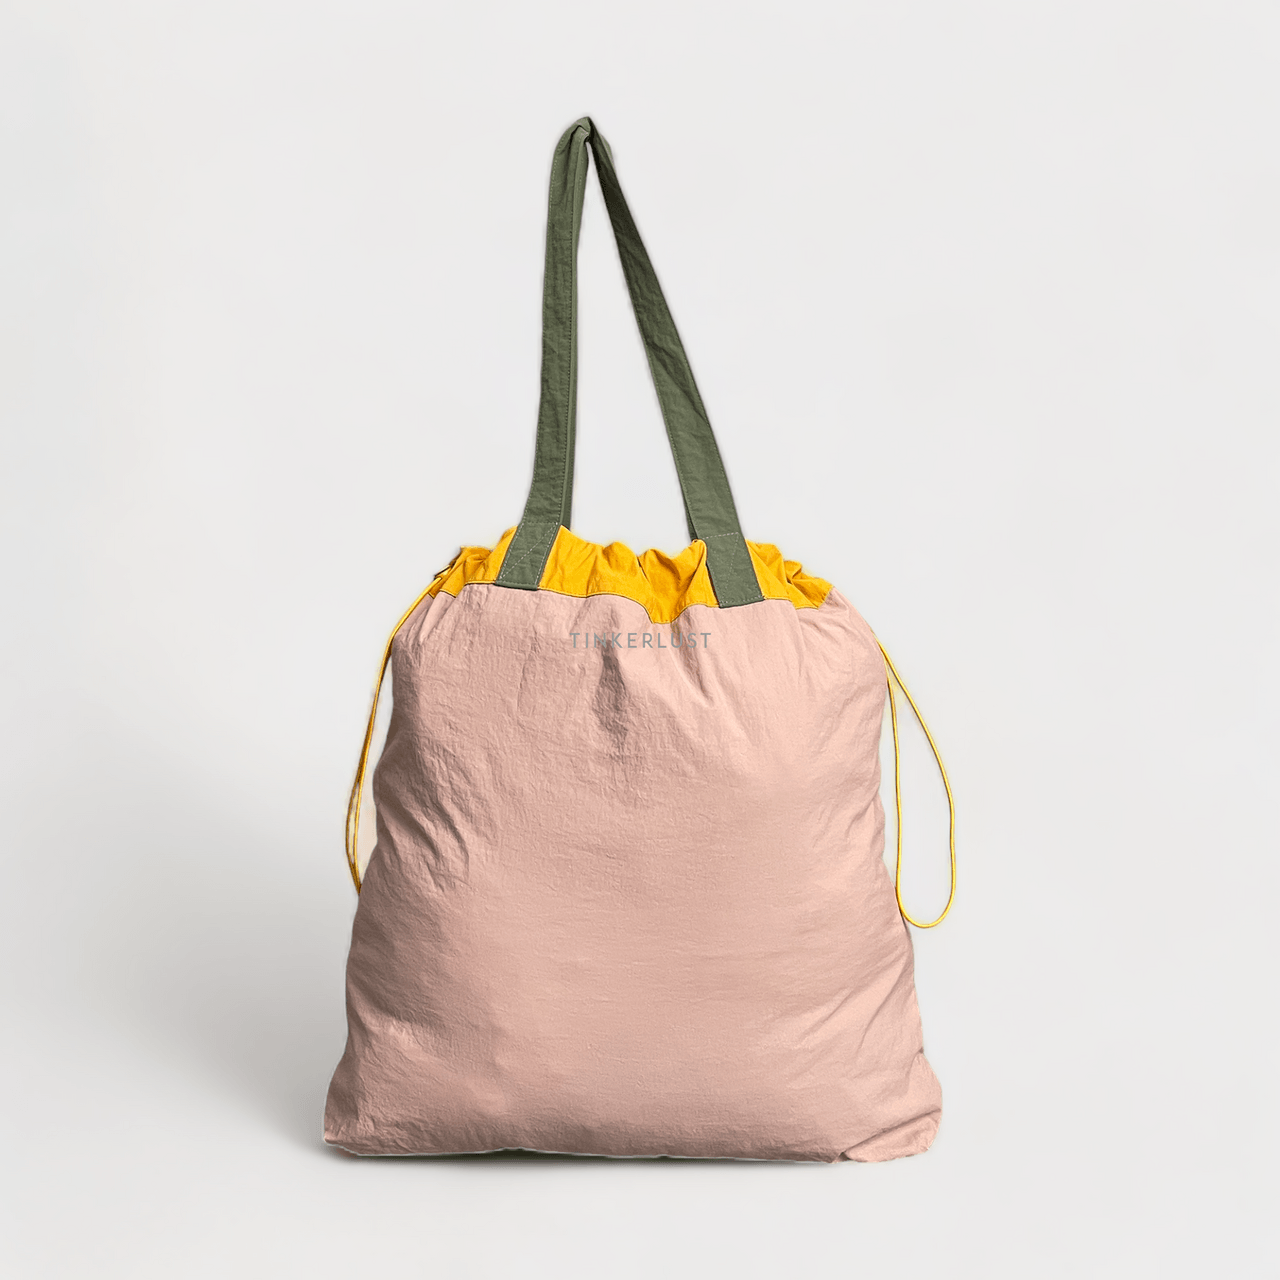 Beyond The vines Dusty Pink Tote Bag